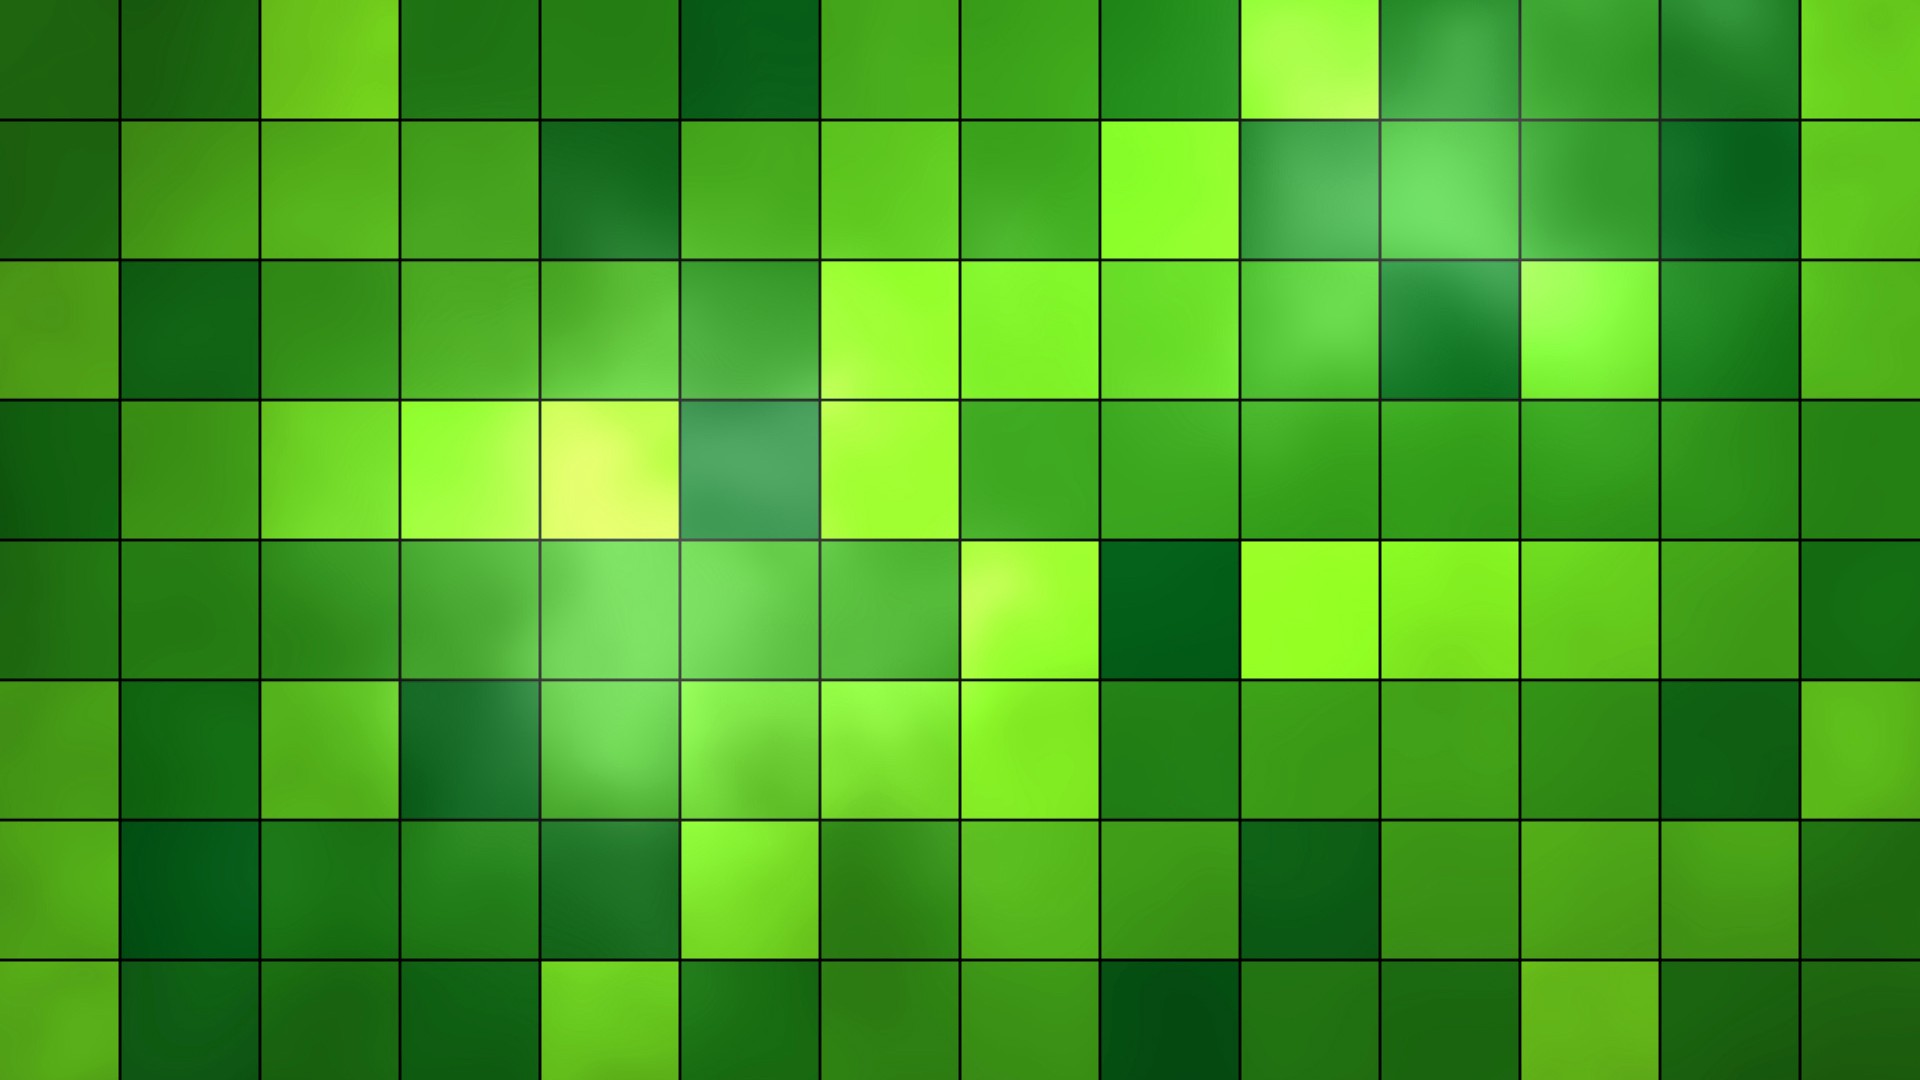 Green Desktop Backgrounds with image resolution 1920x1080 pixel. You can make this wallpaper for your Desktop Computer Backgrounds, Mac Wallpapers, Android Lock screen or iPhone Screensavers